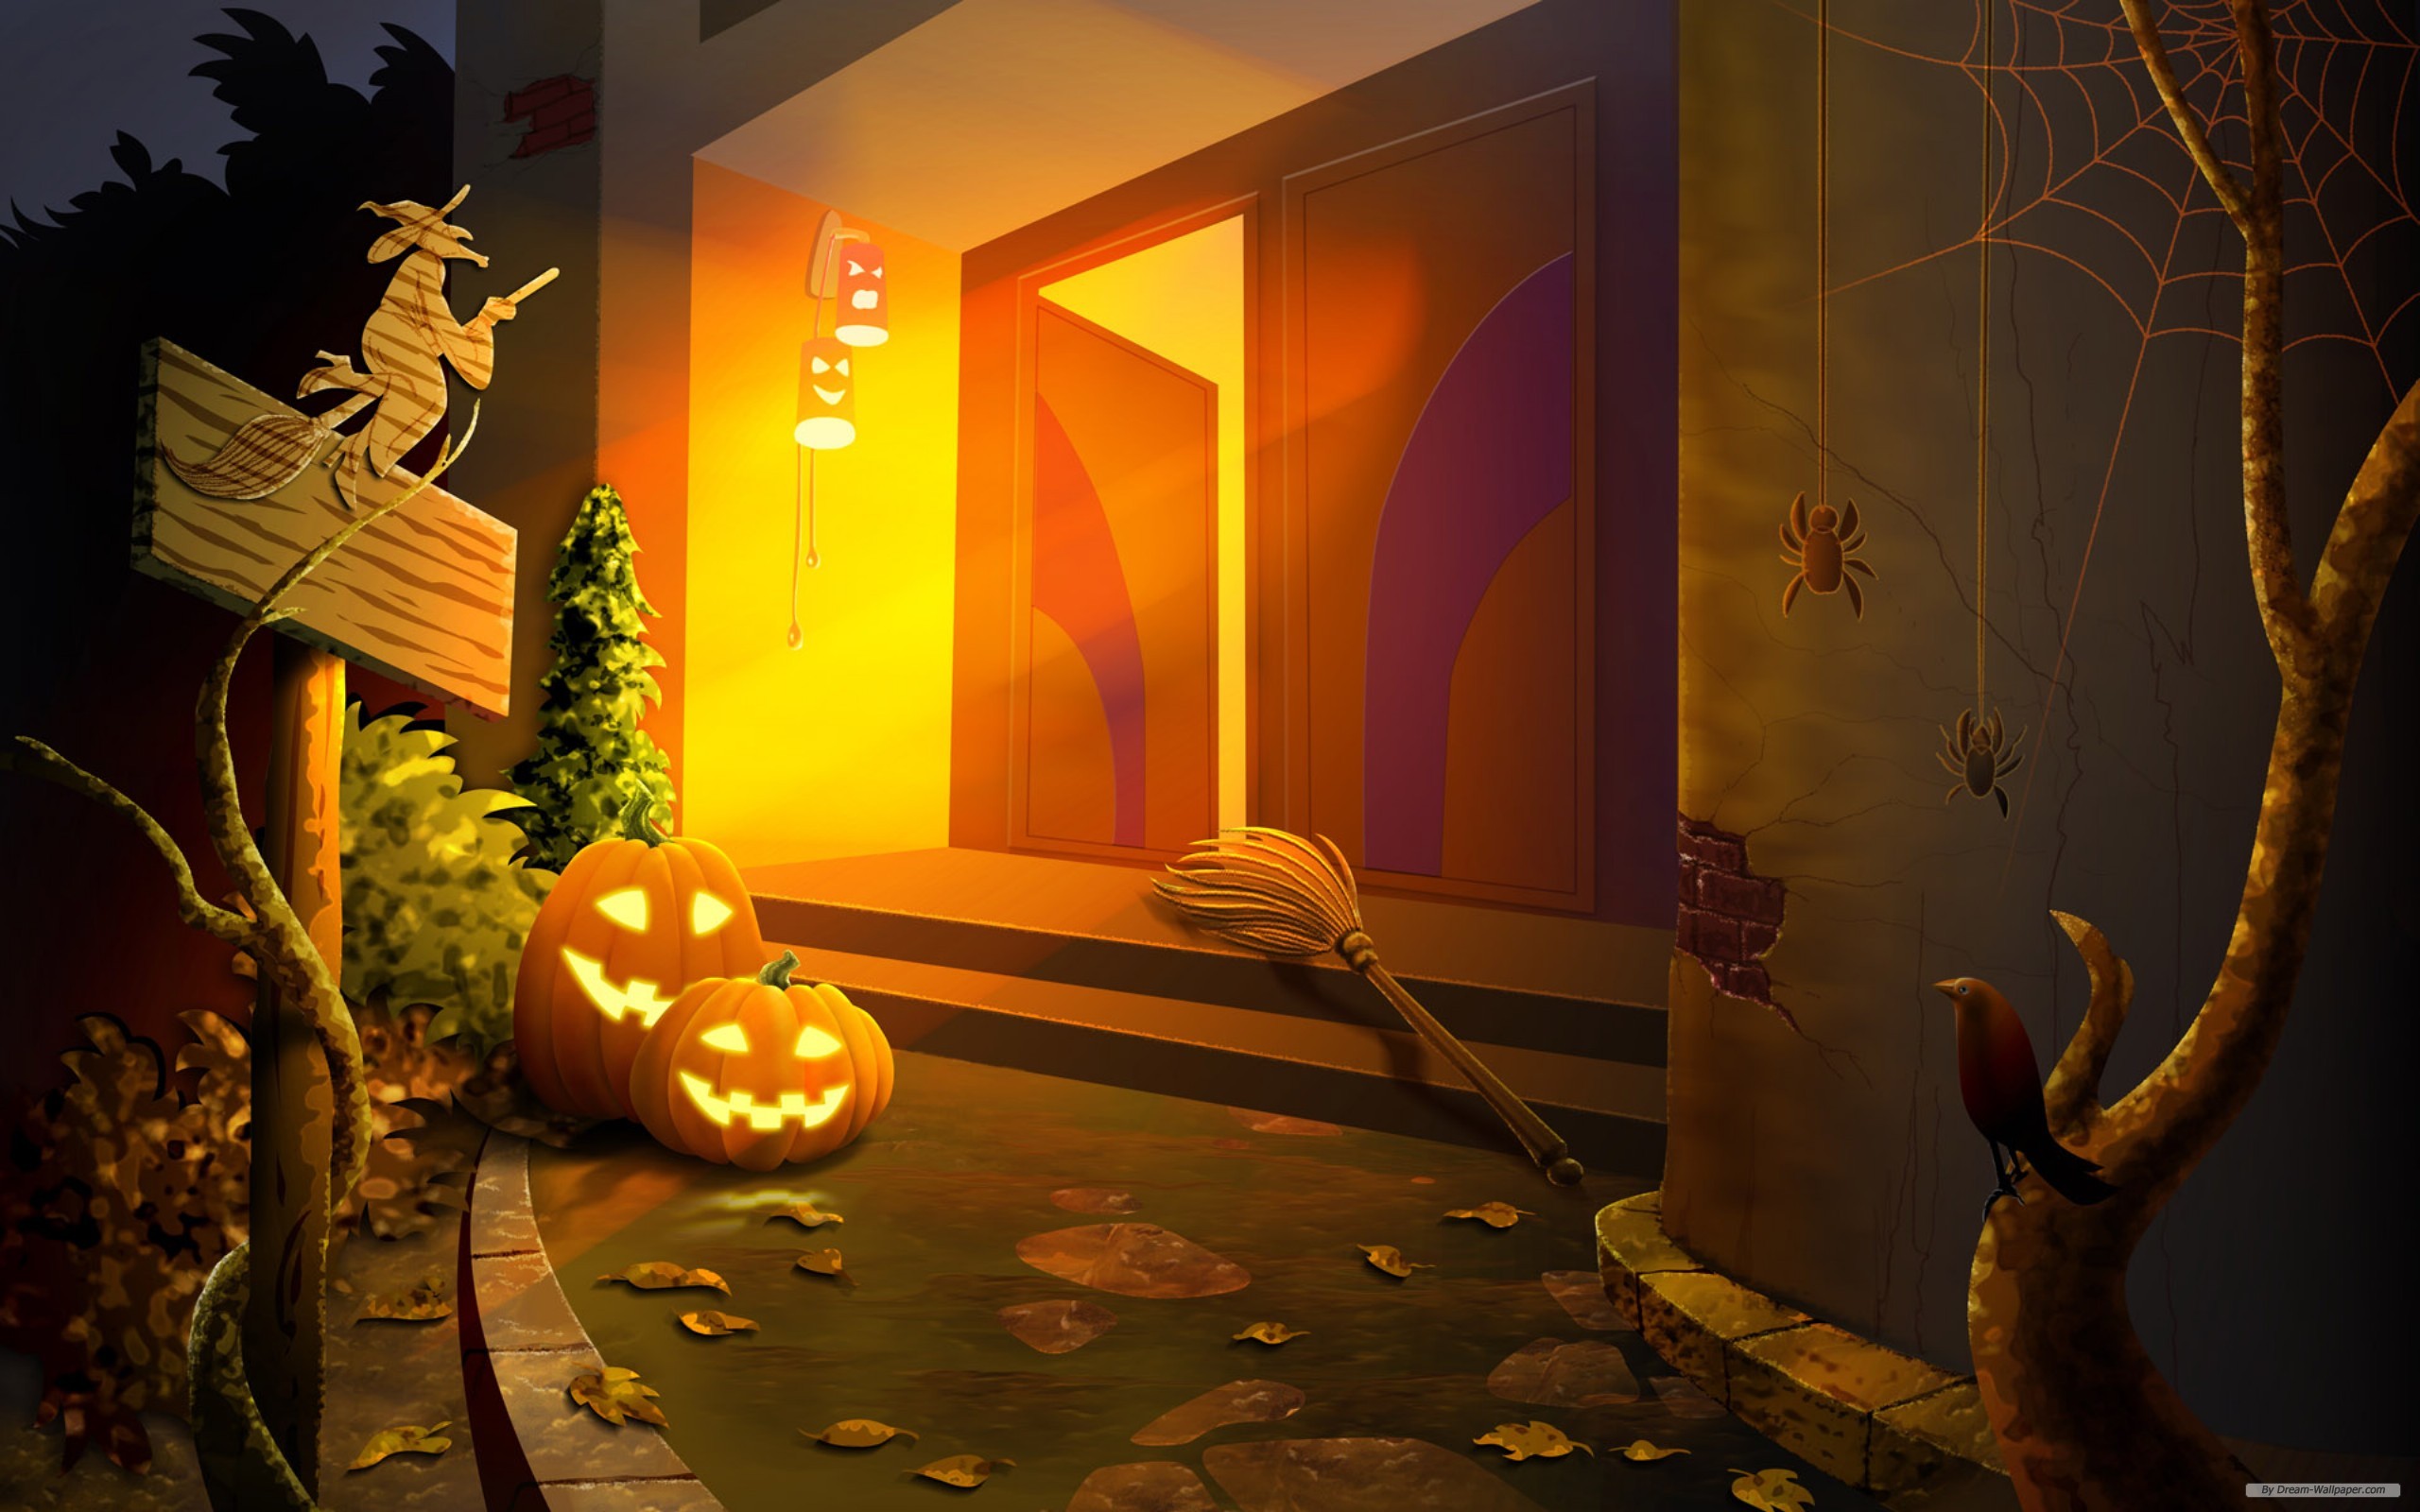 Halloween-inspired desktop wallpaper featuring holiday-themed elements.